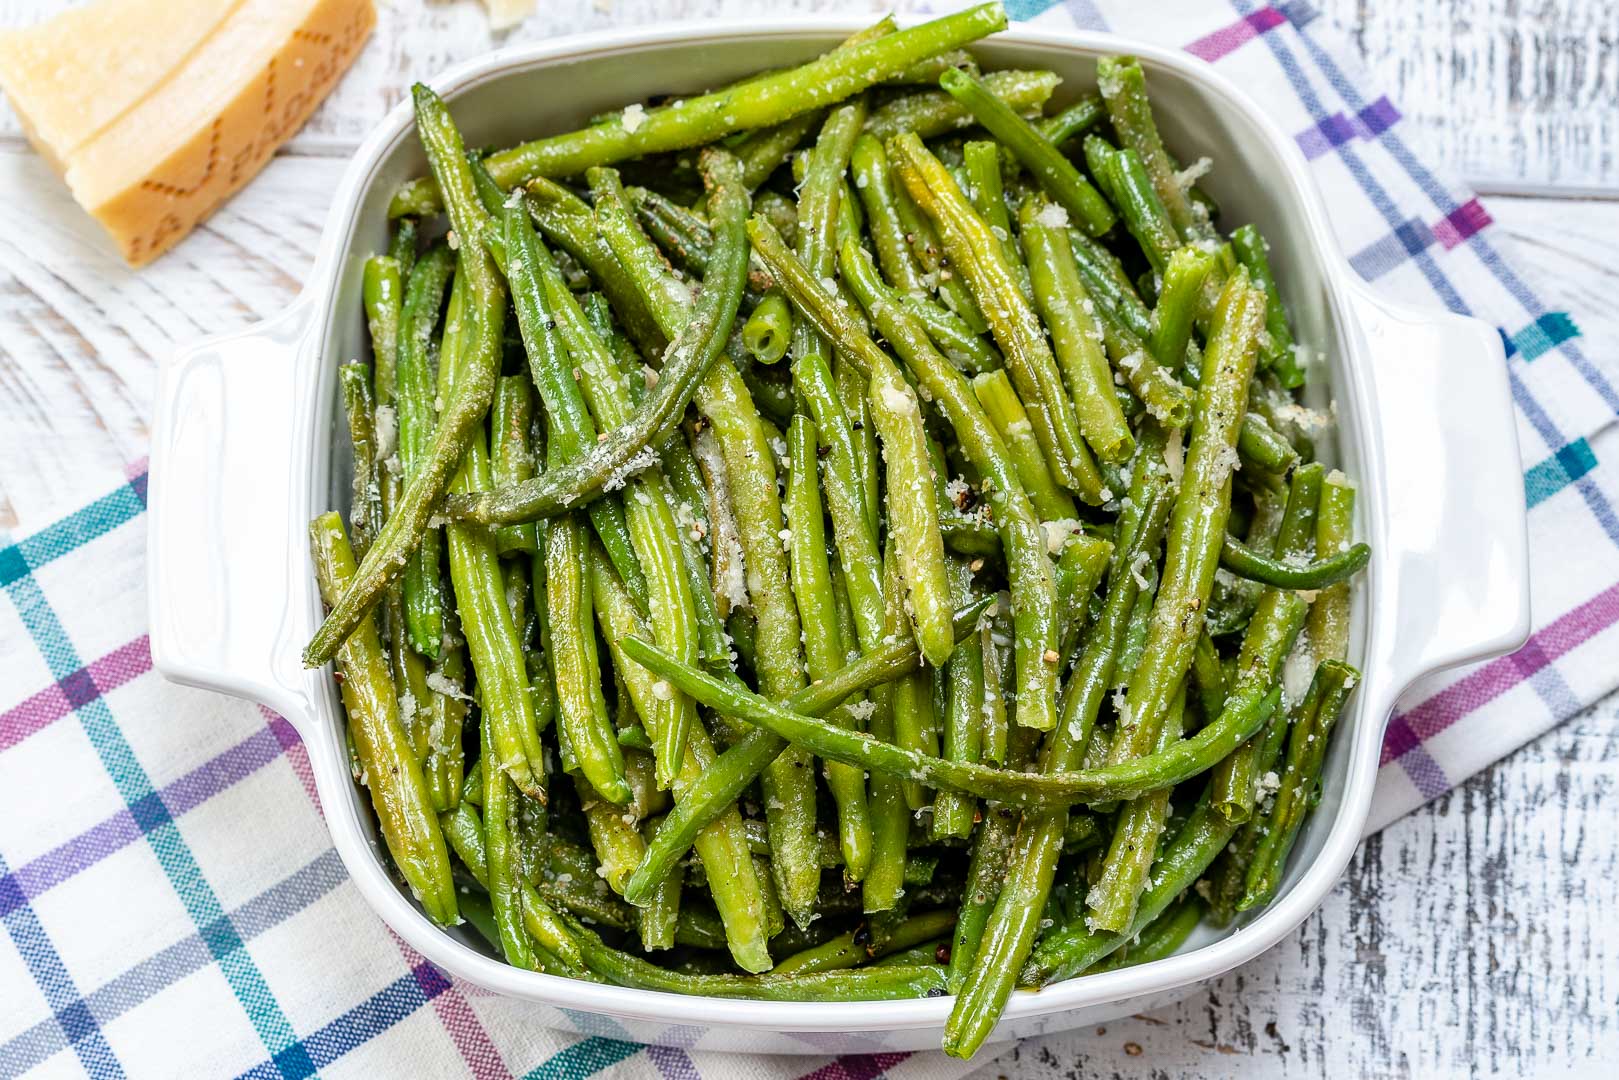 Parmesan Roasted Green Beans for Side Dish